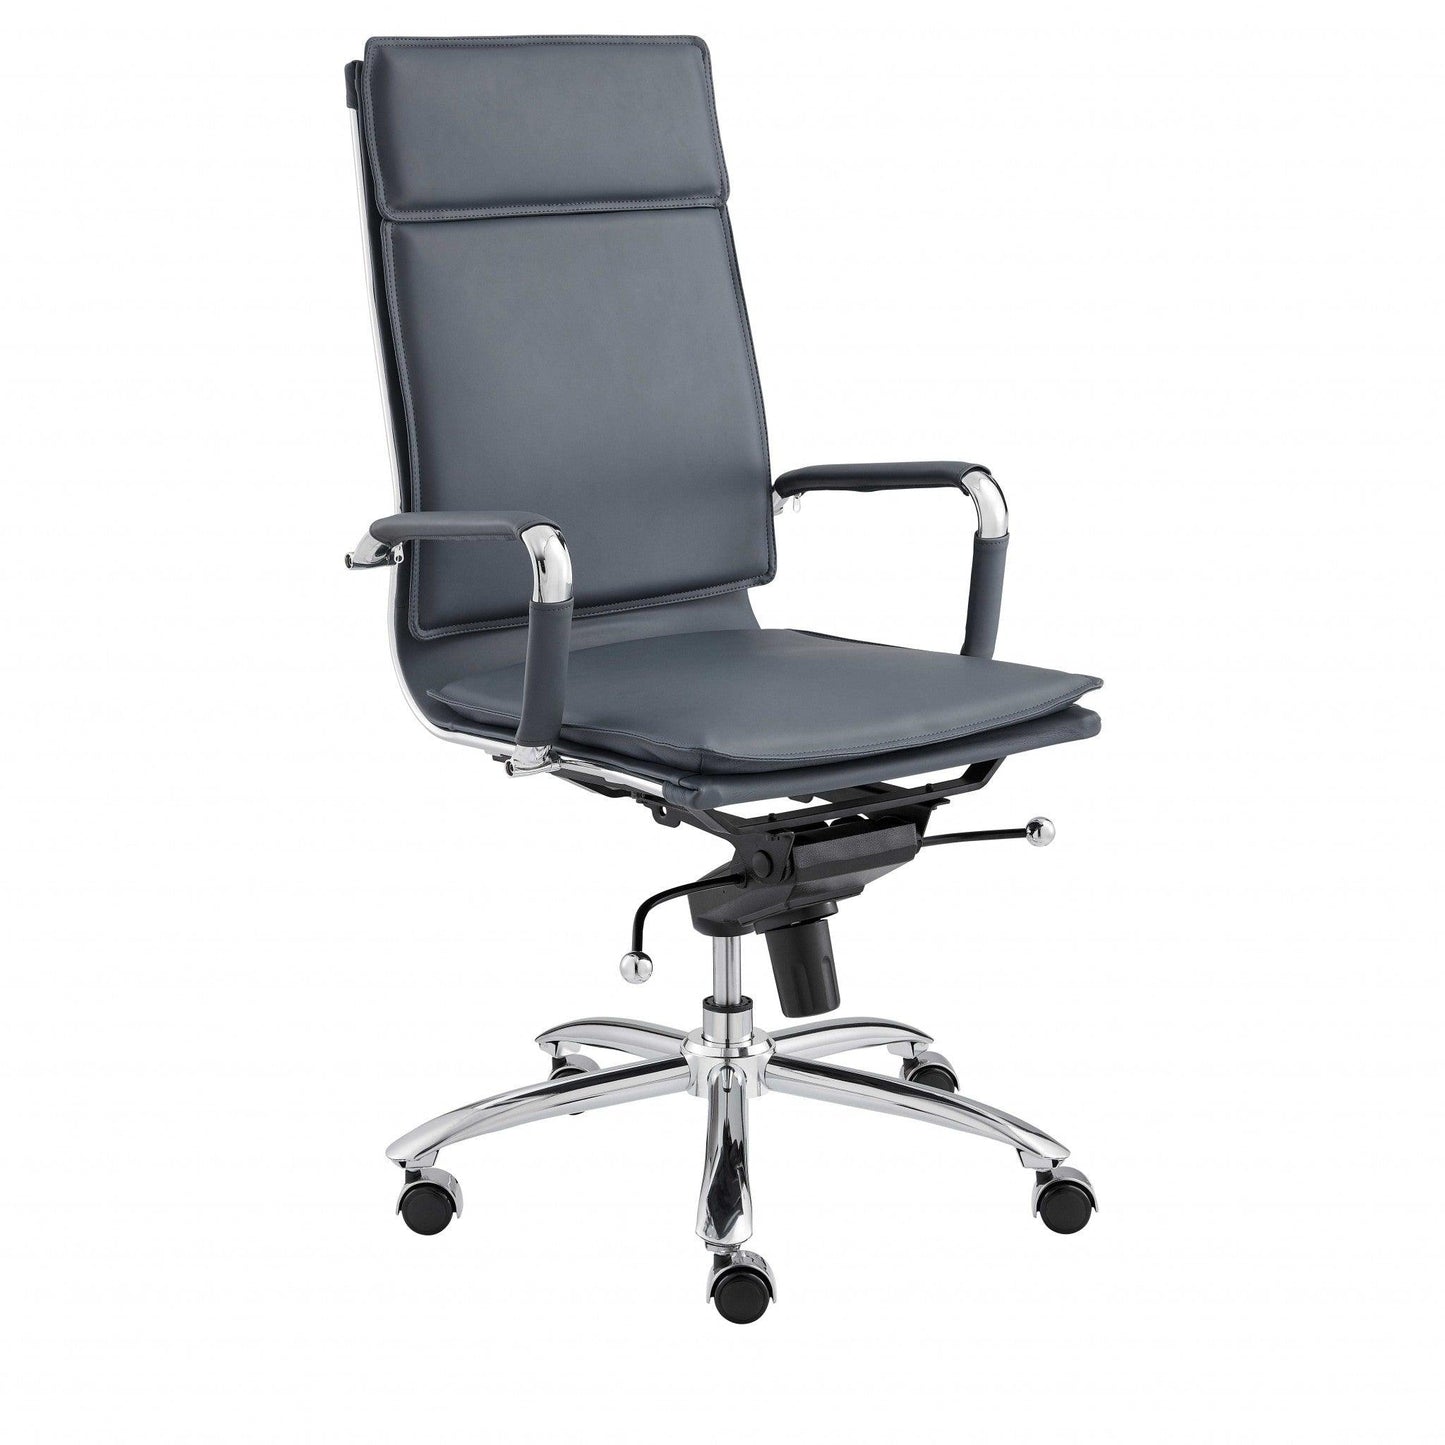 26.38" X 27.56" X 45.87" High Back Office Chair in Blue with Chromed Steel Base - AFS